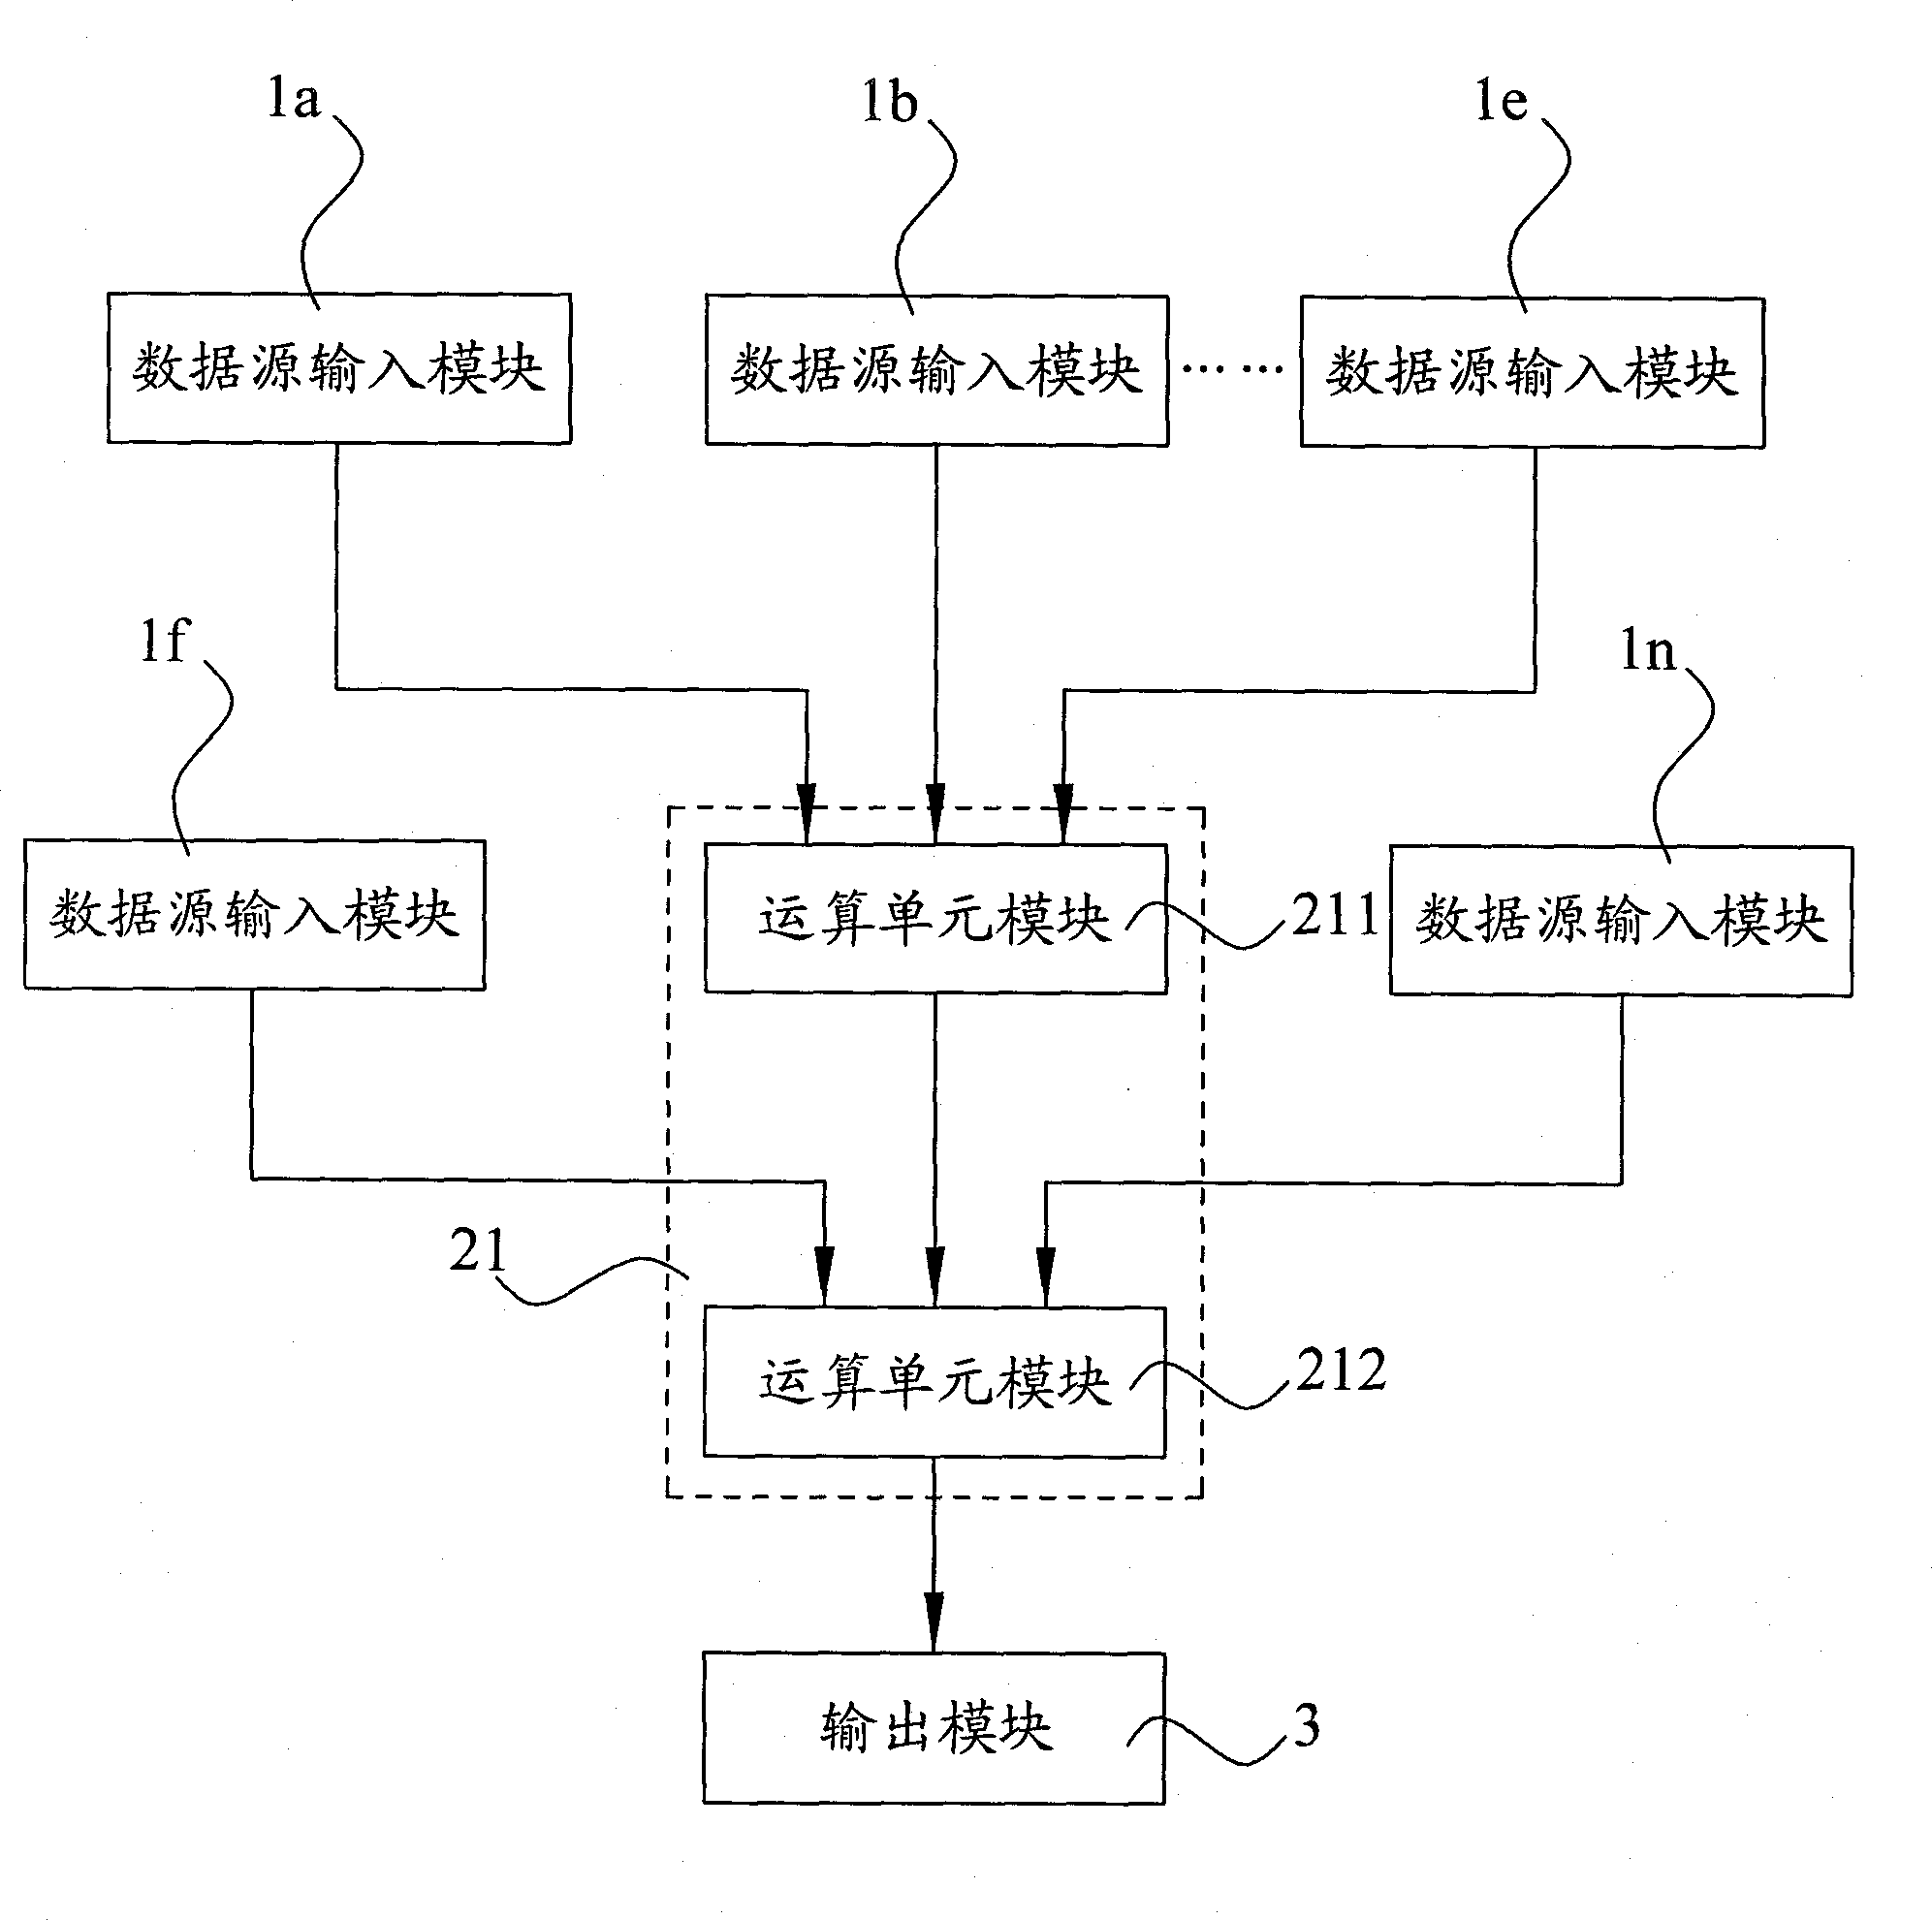 Dual-backup network light control desk and control method